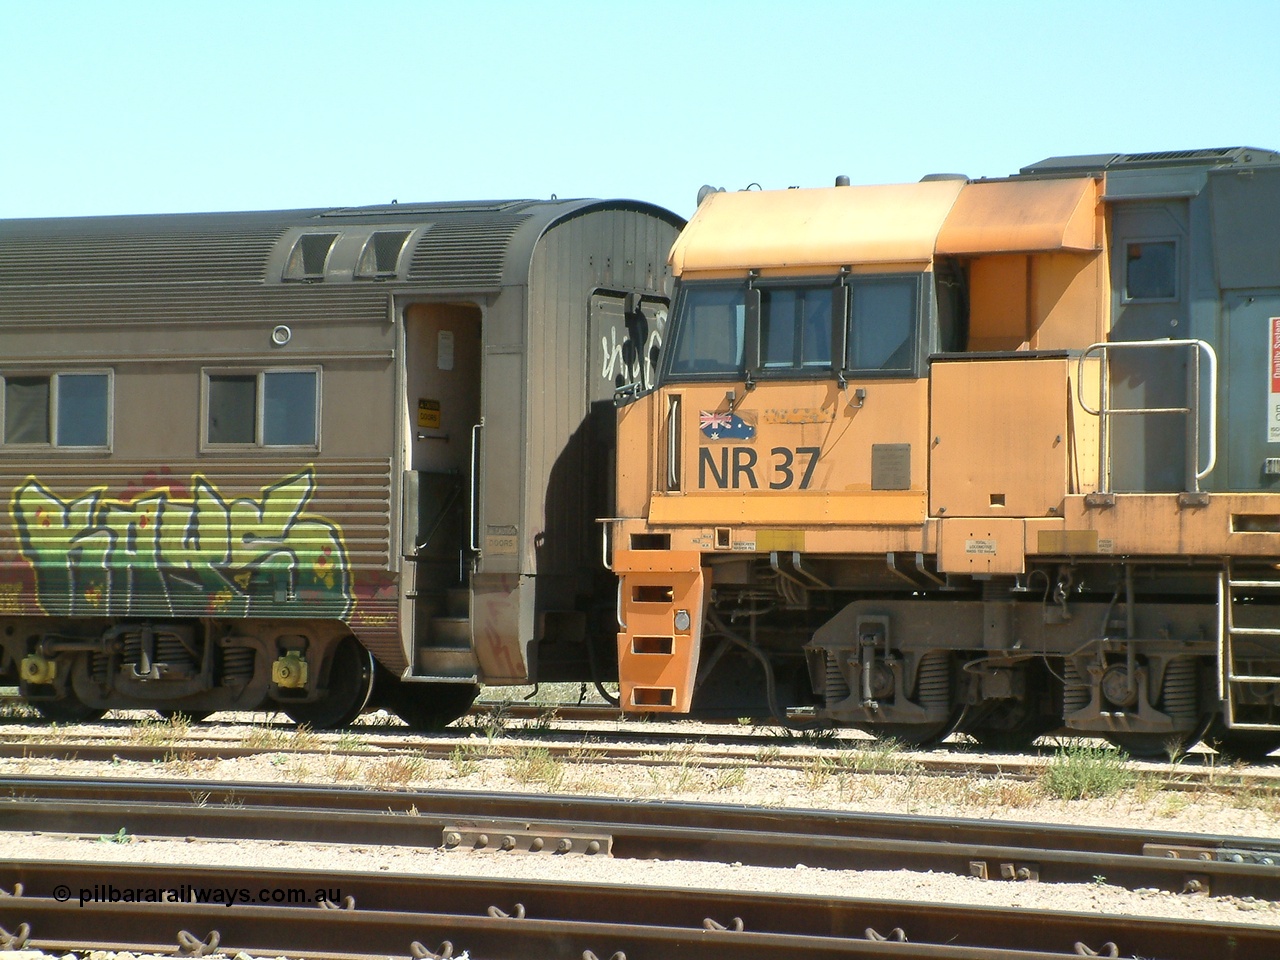 030404 125253
Port Augusta Spencer Junction yard, a Perth bound intermodal awaits departure time on 13 Road behind National Rail NR class unit built by Goninan as GE Cv40-9i models, NR 37 serial 7250-06 / 97-239. 4th April 2003.
Keywords: NR-class;NR37;Goninan;GE;Cv40-9i;7250-06/97-239;